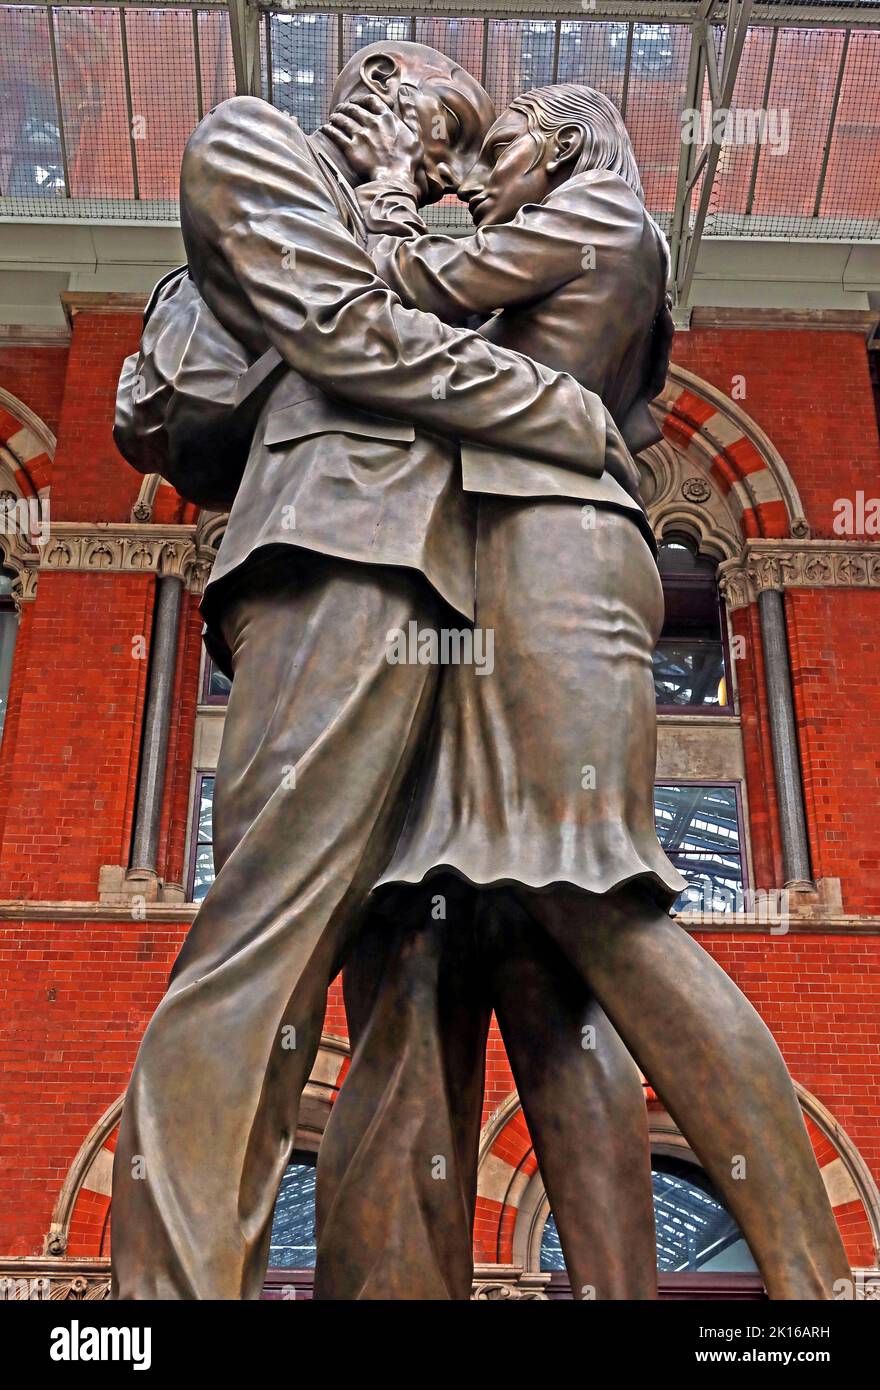 The Meeting Place, a statue by British artist Paul Day, in the Grand Terrace, St Pancras International railway station, London, England, UK,  N1C 4QP Stock Photo